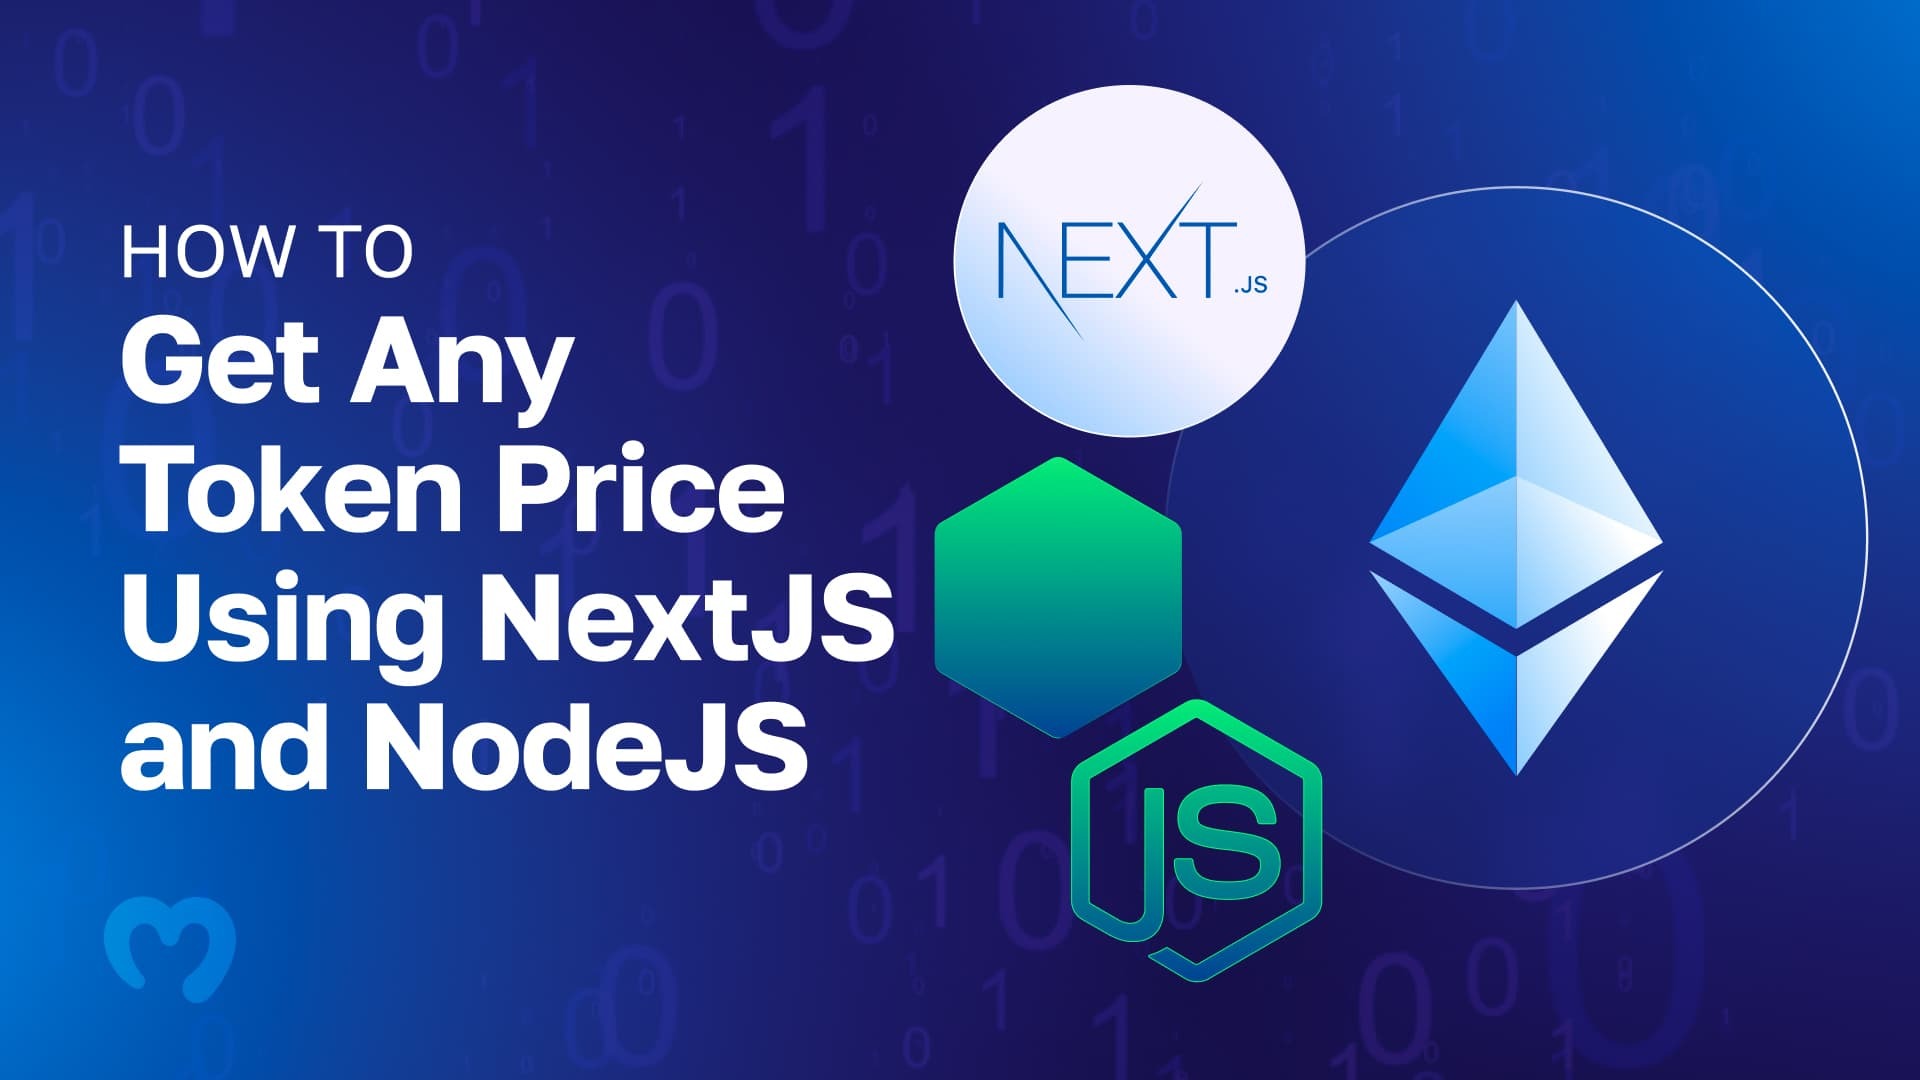 Exploring how to get any token price using nextjs and nodejs